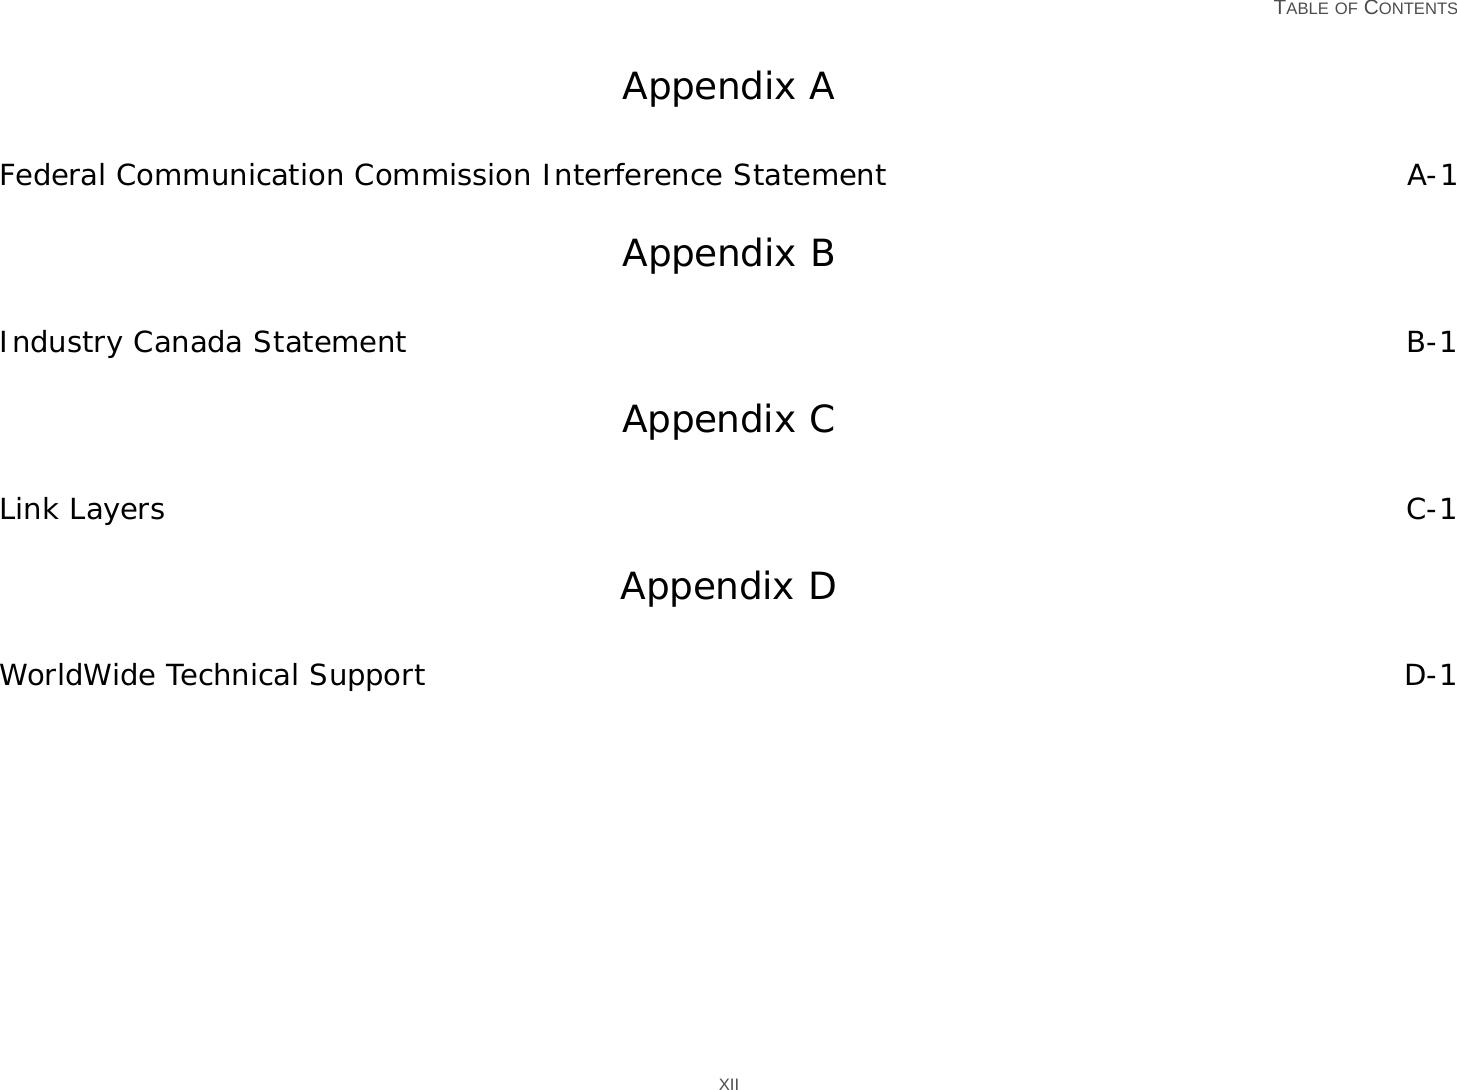   TABLE OF CONTENTS XIIAppendix AFederal Communication Commission Interference Statement A-1Appendix BIndustry Canada Statement B-1Appendix CLink Layers C-1Appendix DWorldWide Technical Support D-1